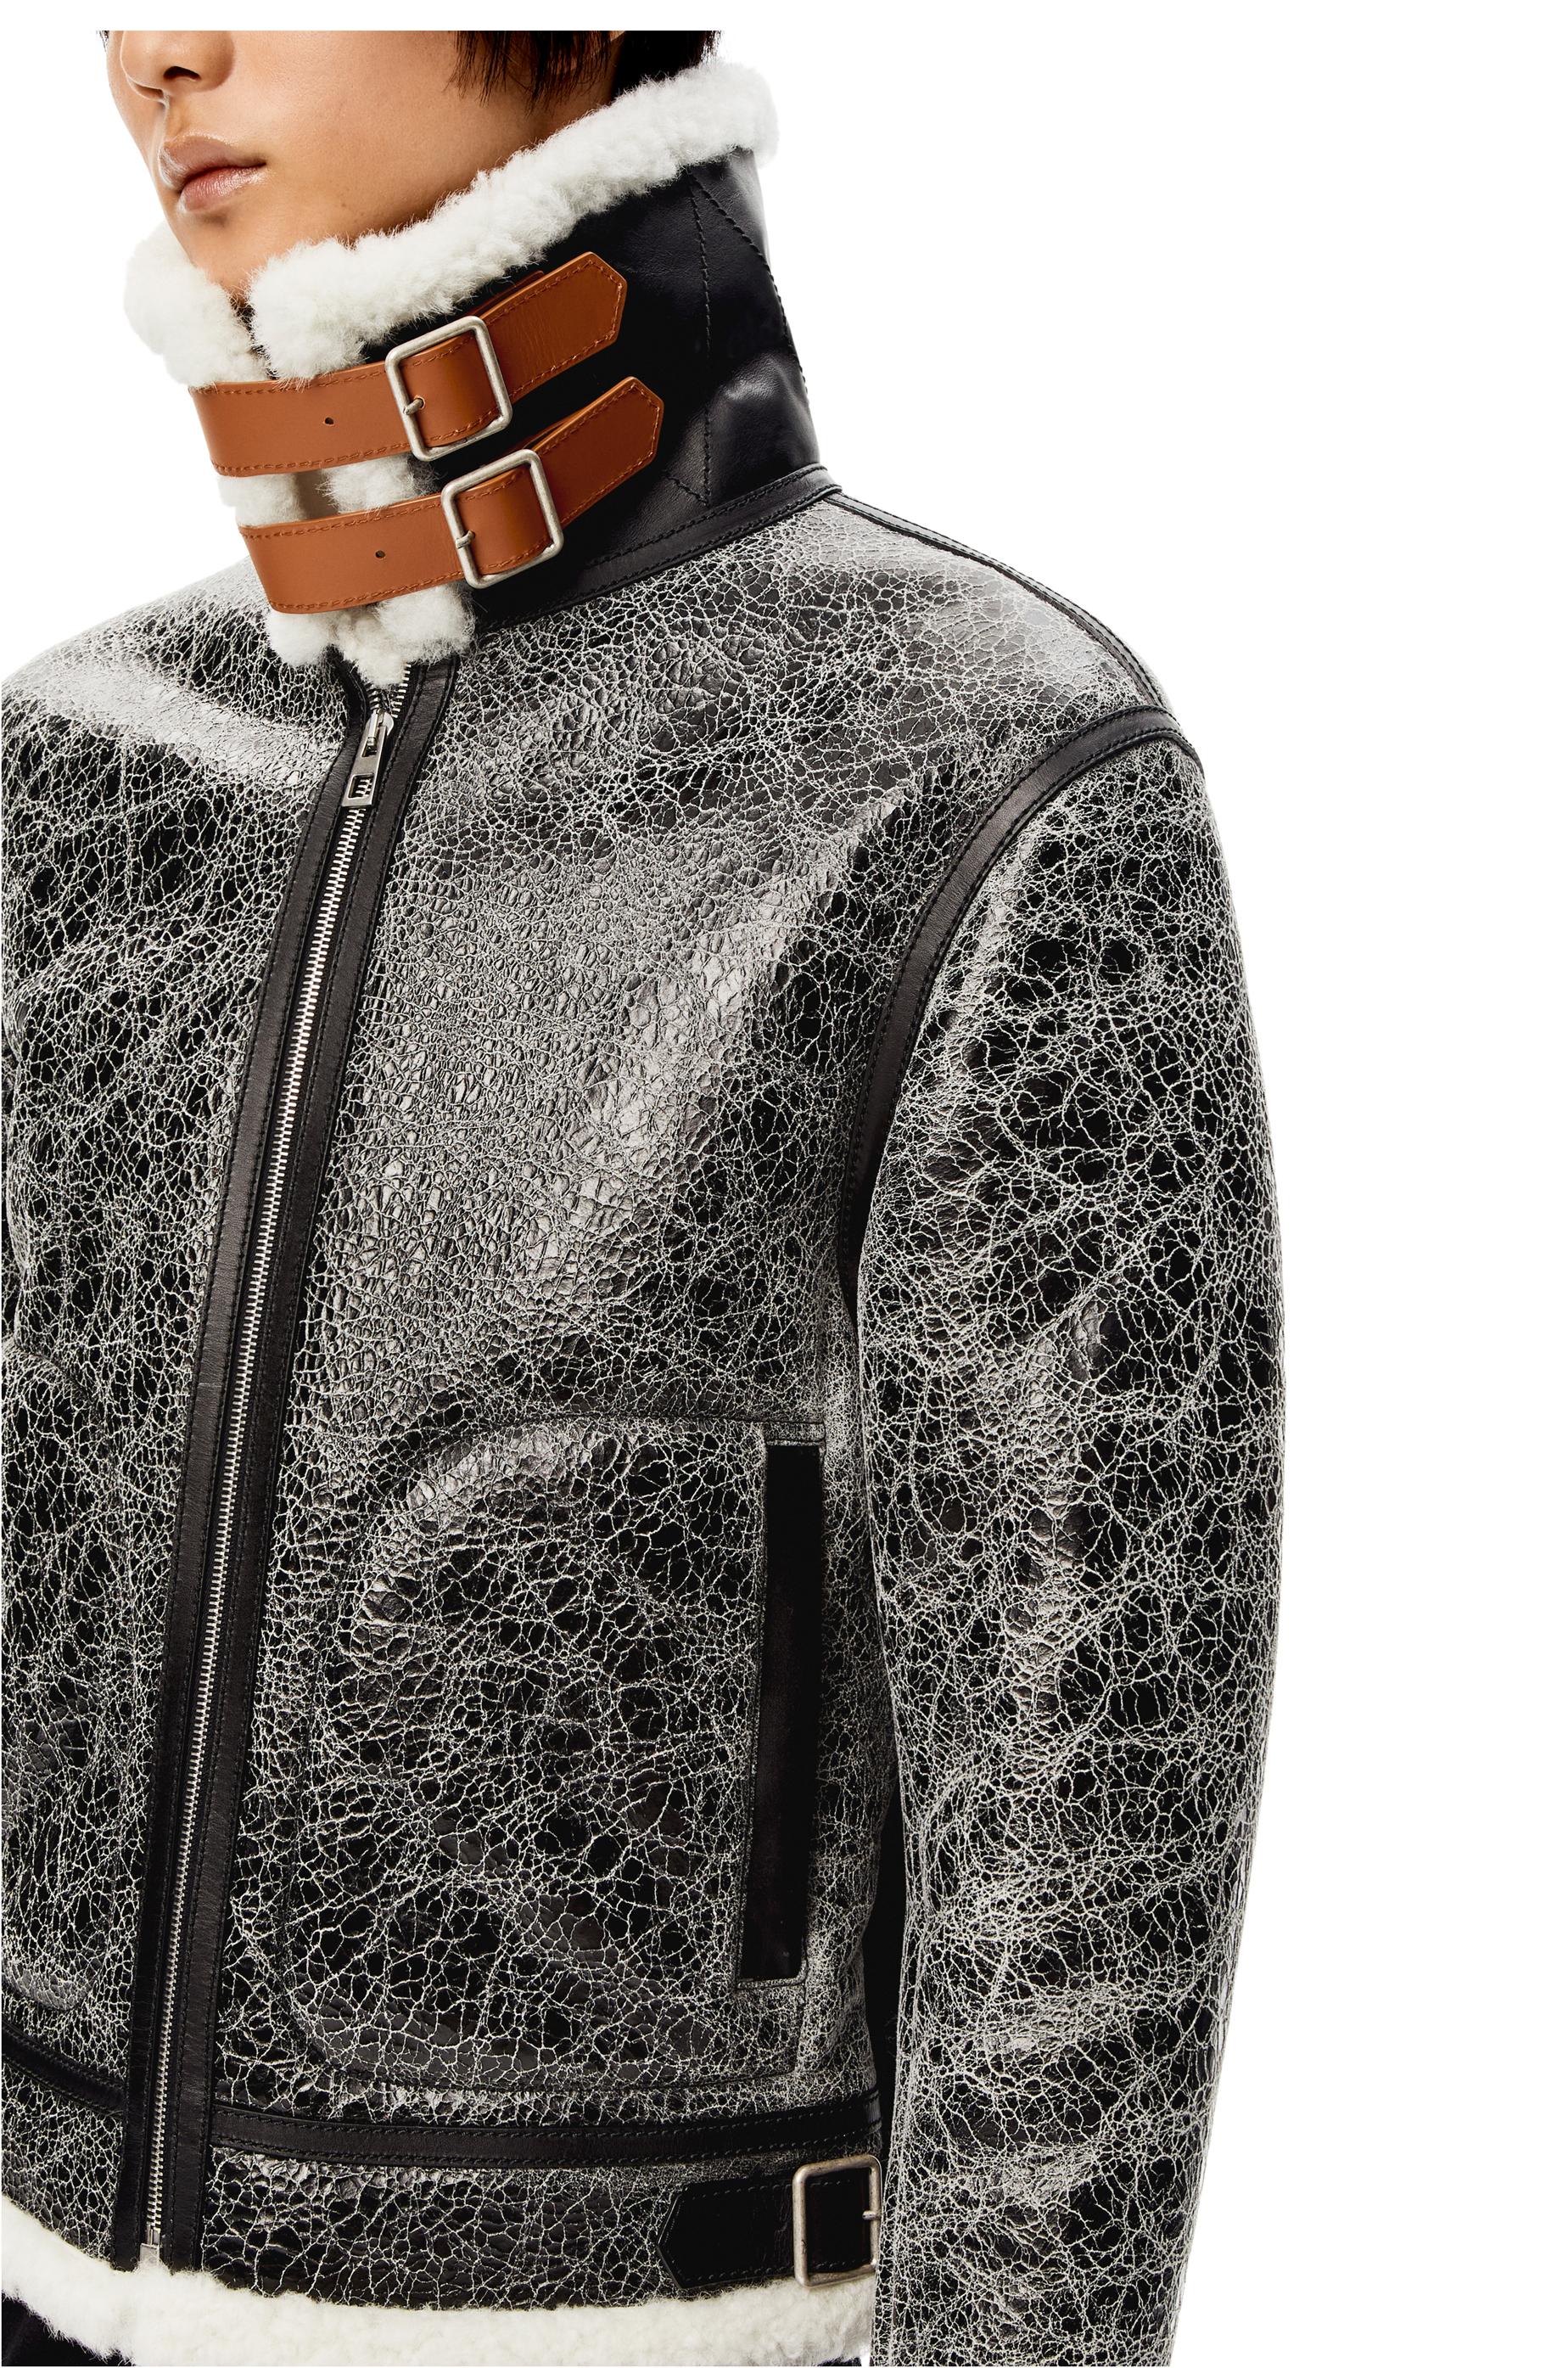 Loewe Leather Aviator Jacket In Crackled Nappa And Shearling in 